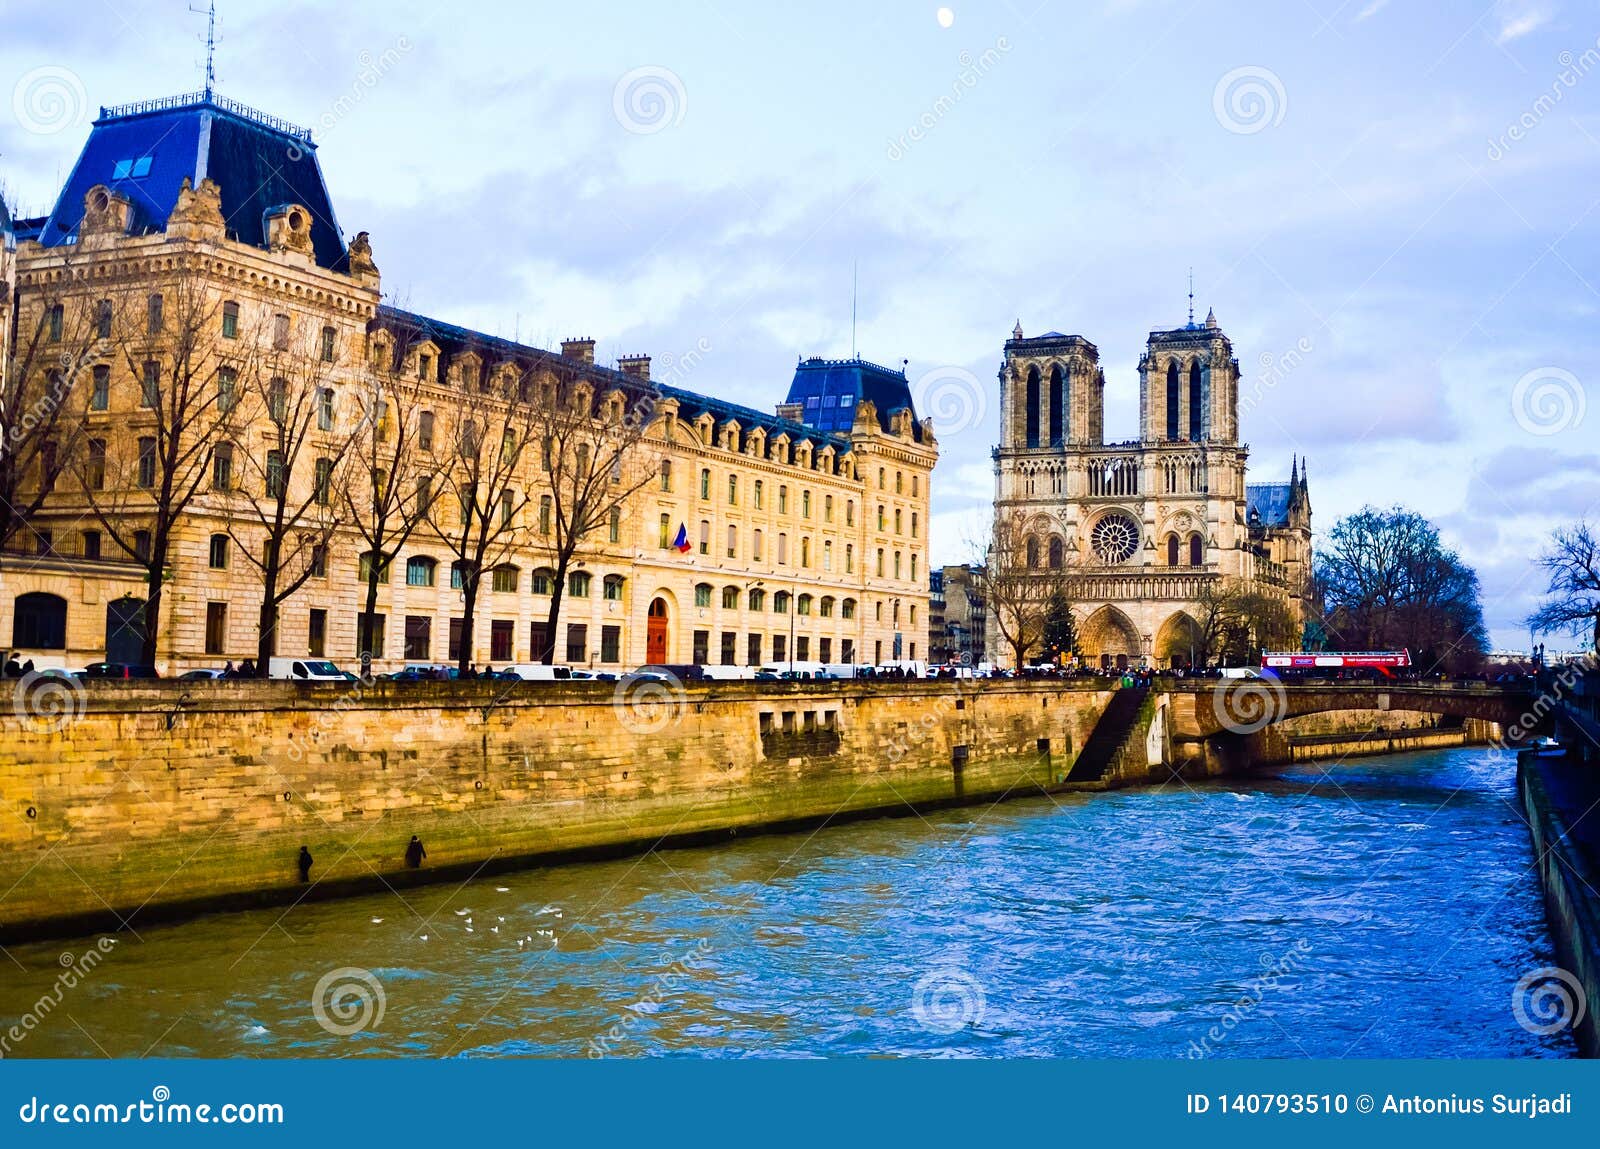 Calm peaceful ancient traditional historical building in the sunset time. Gorgeous and peaceful stone building with Notre Dame cathedral church on the side of city river in Paris Europe